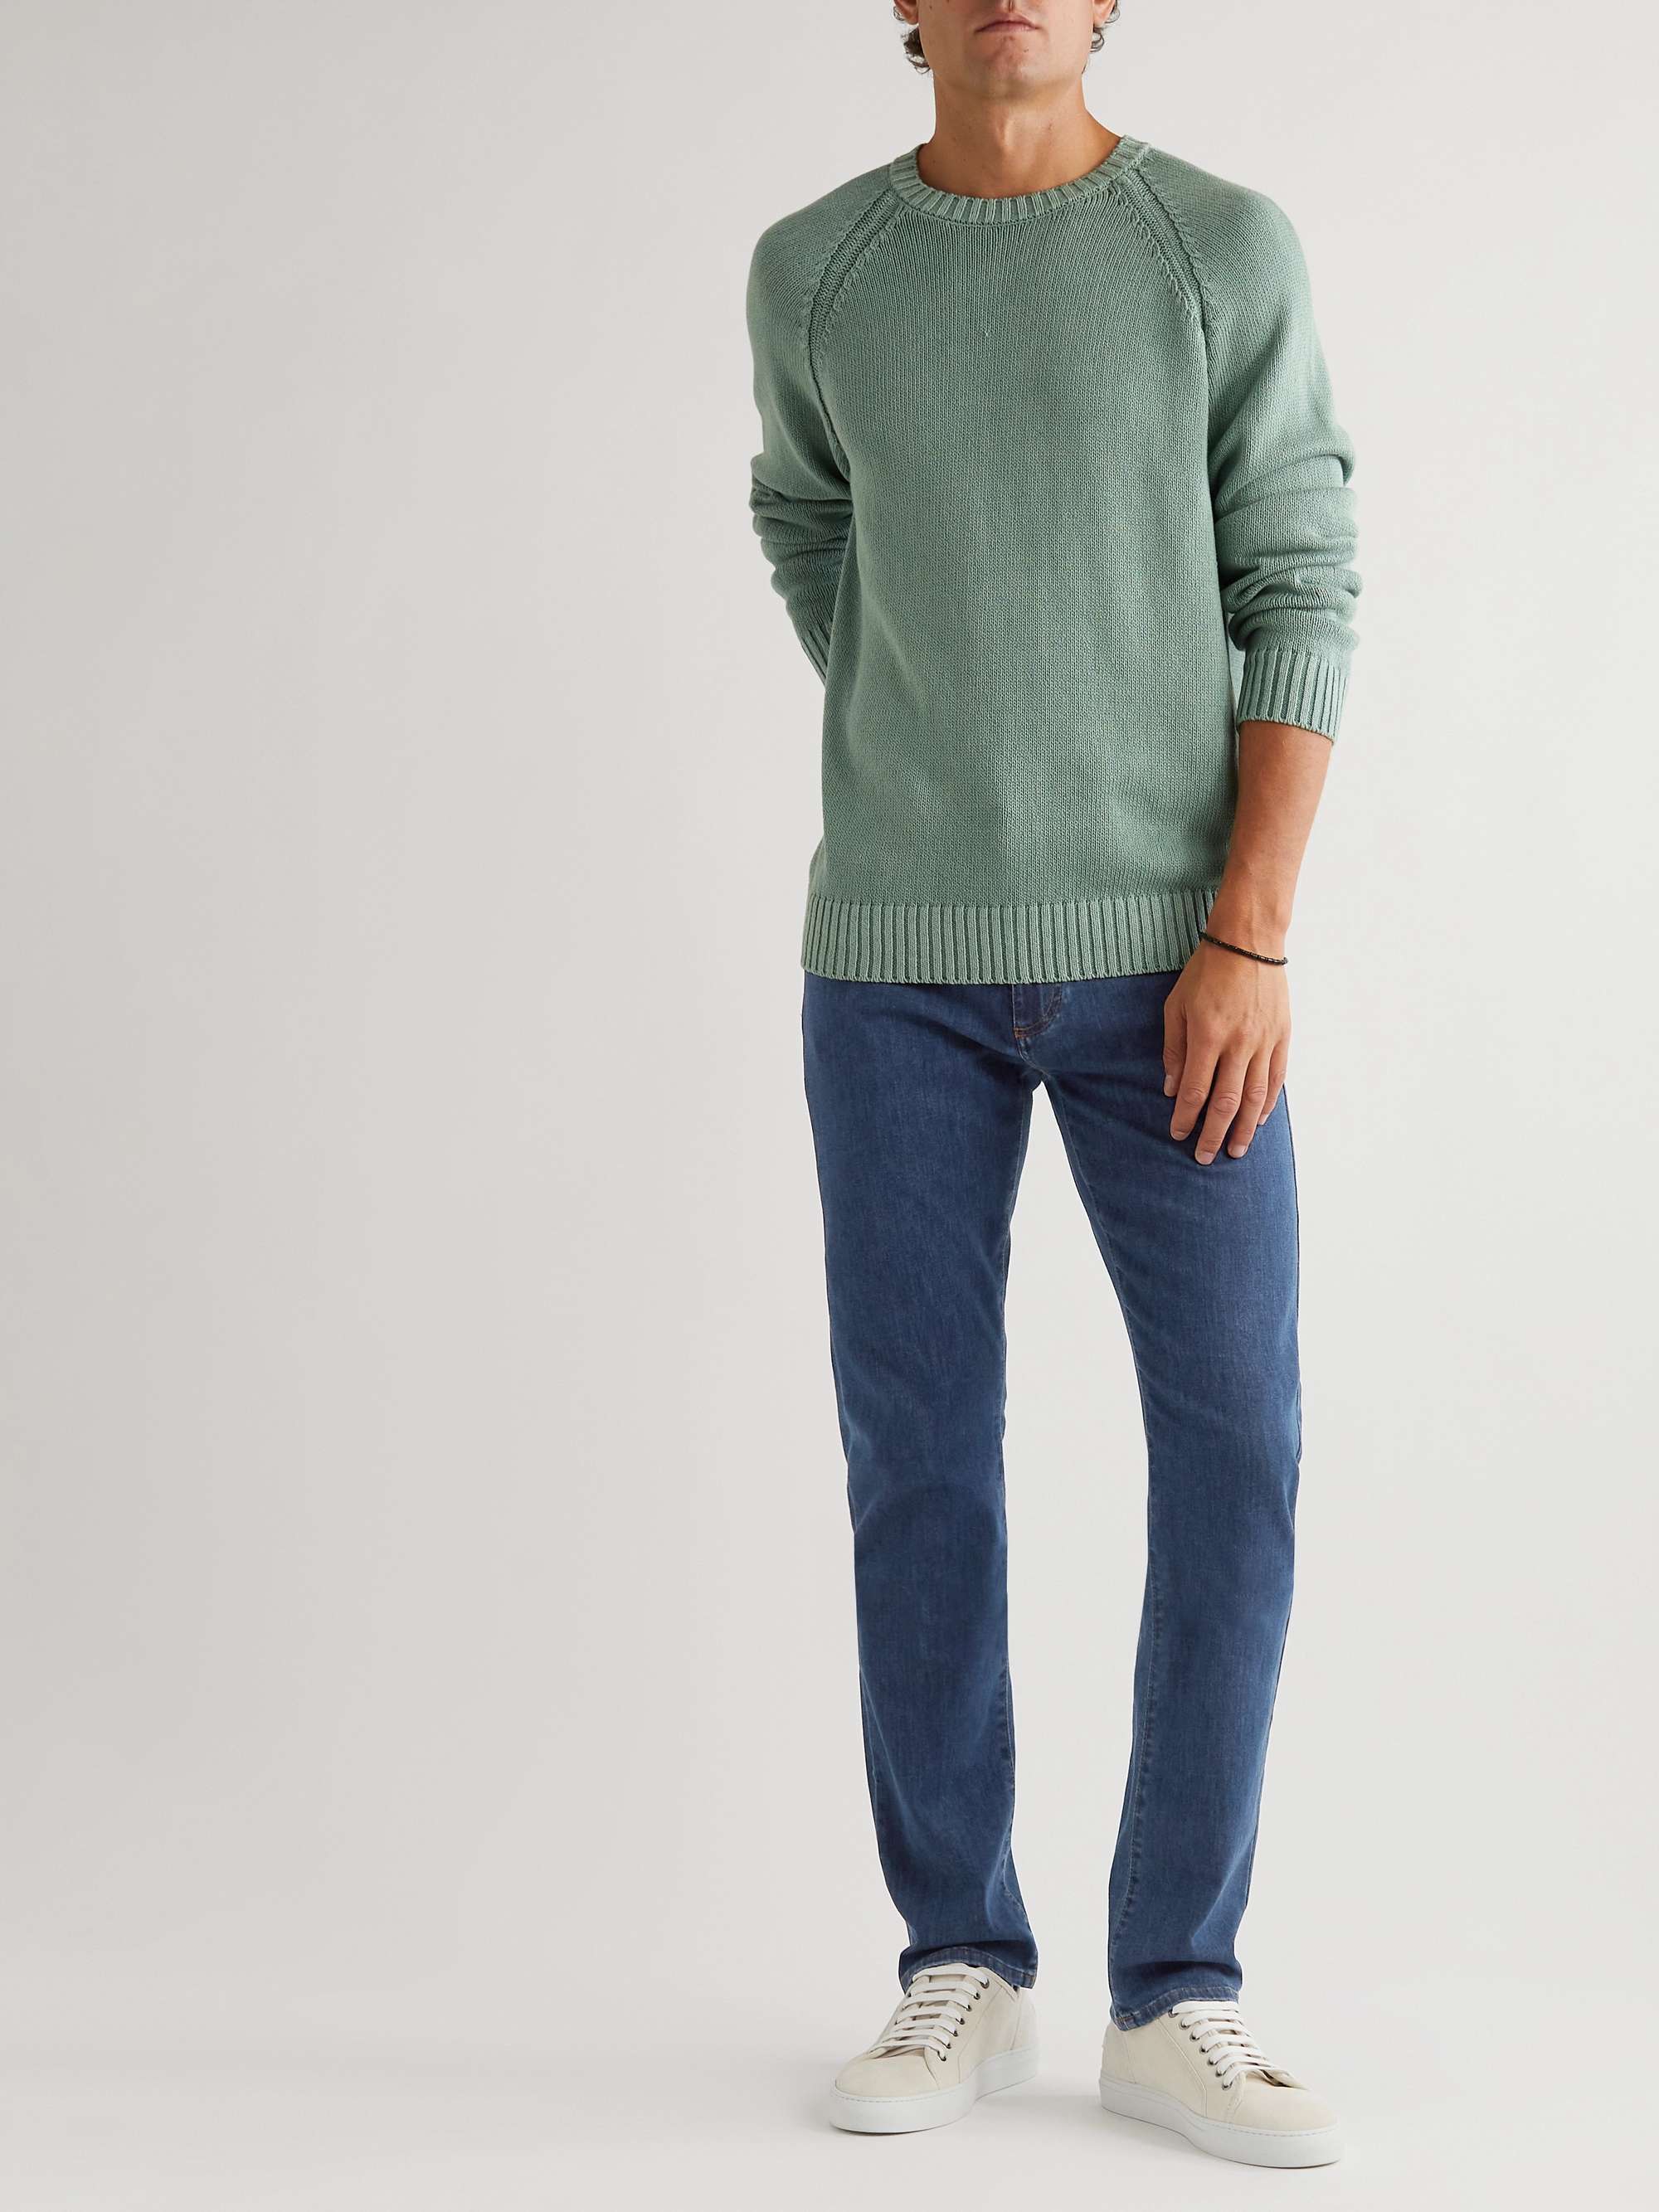 CANALI Slim-Fit Tapered Jeans | MR PORTER